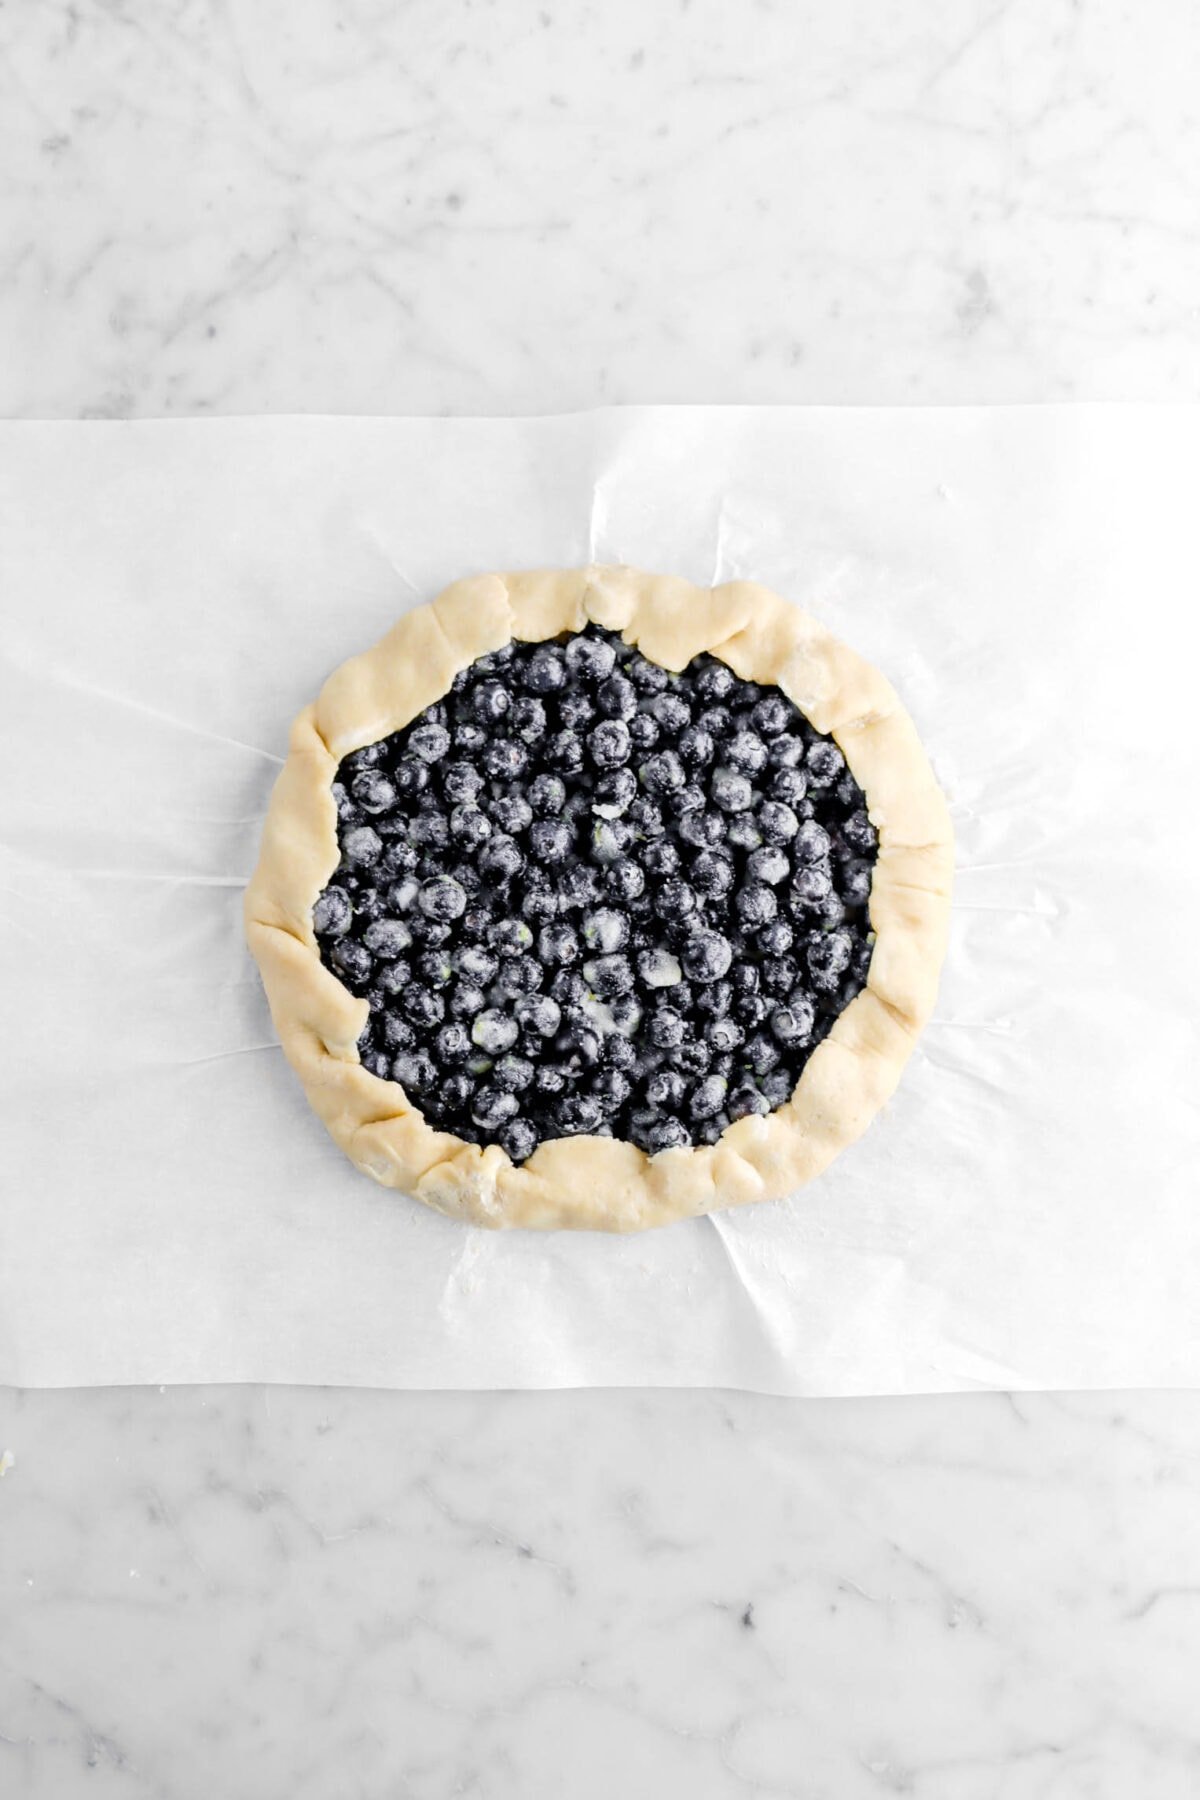 edges of pie crust folded up over blueberries.